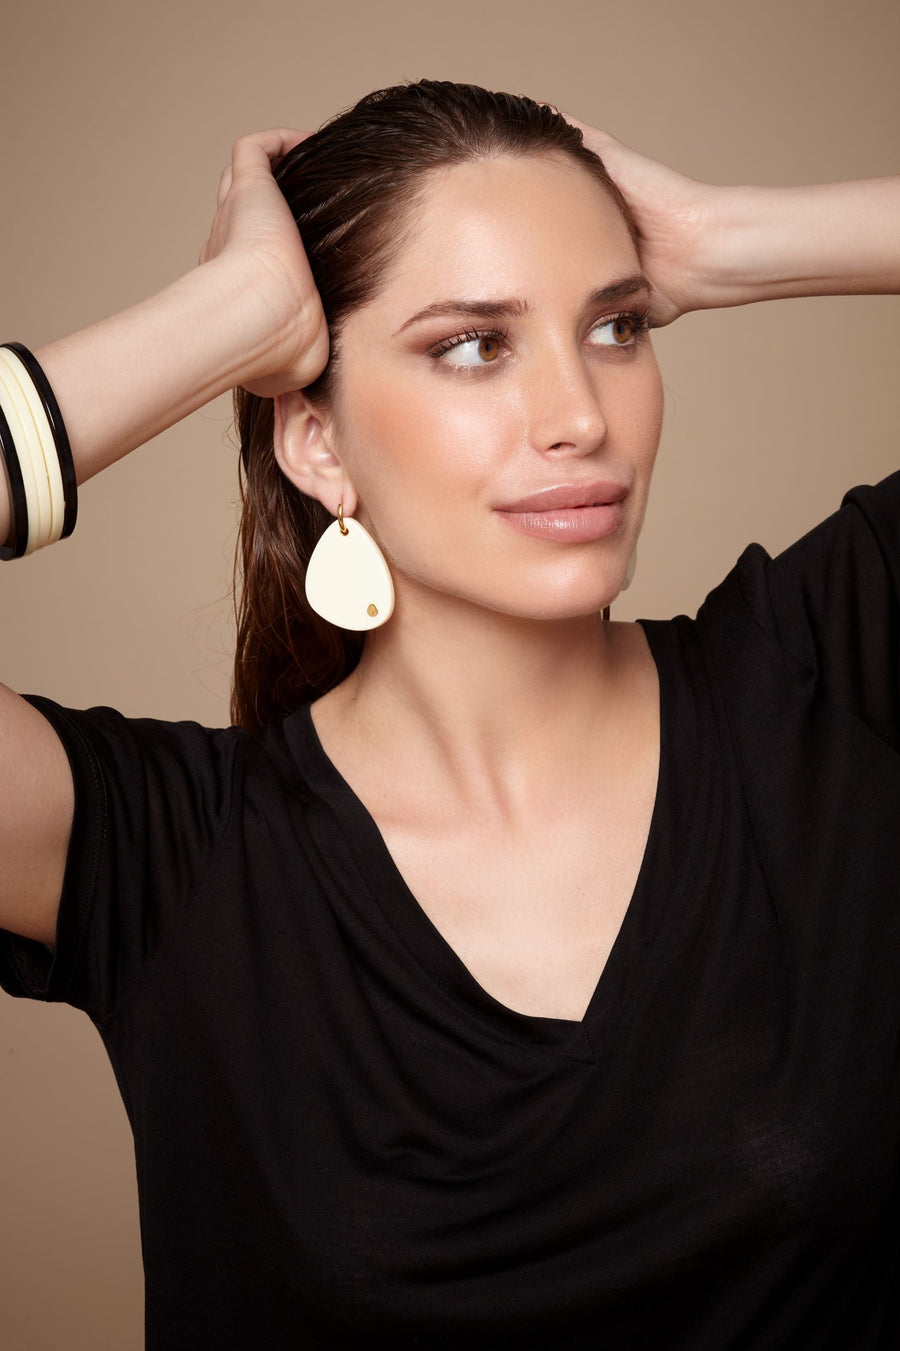 The Eclectic Irregular Large Ivory Earrings